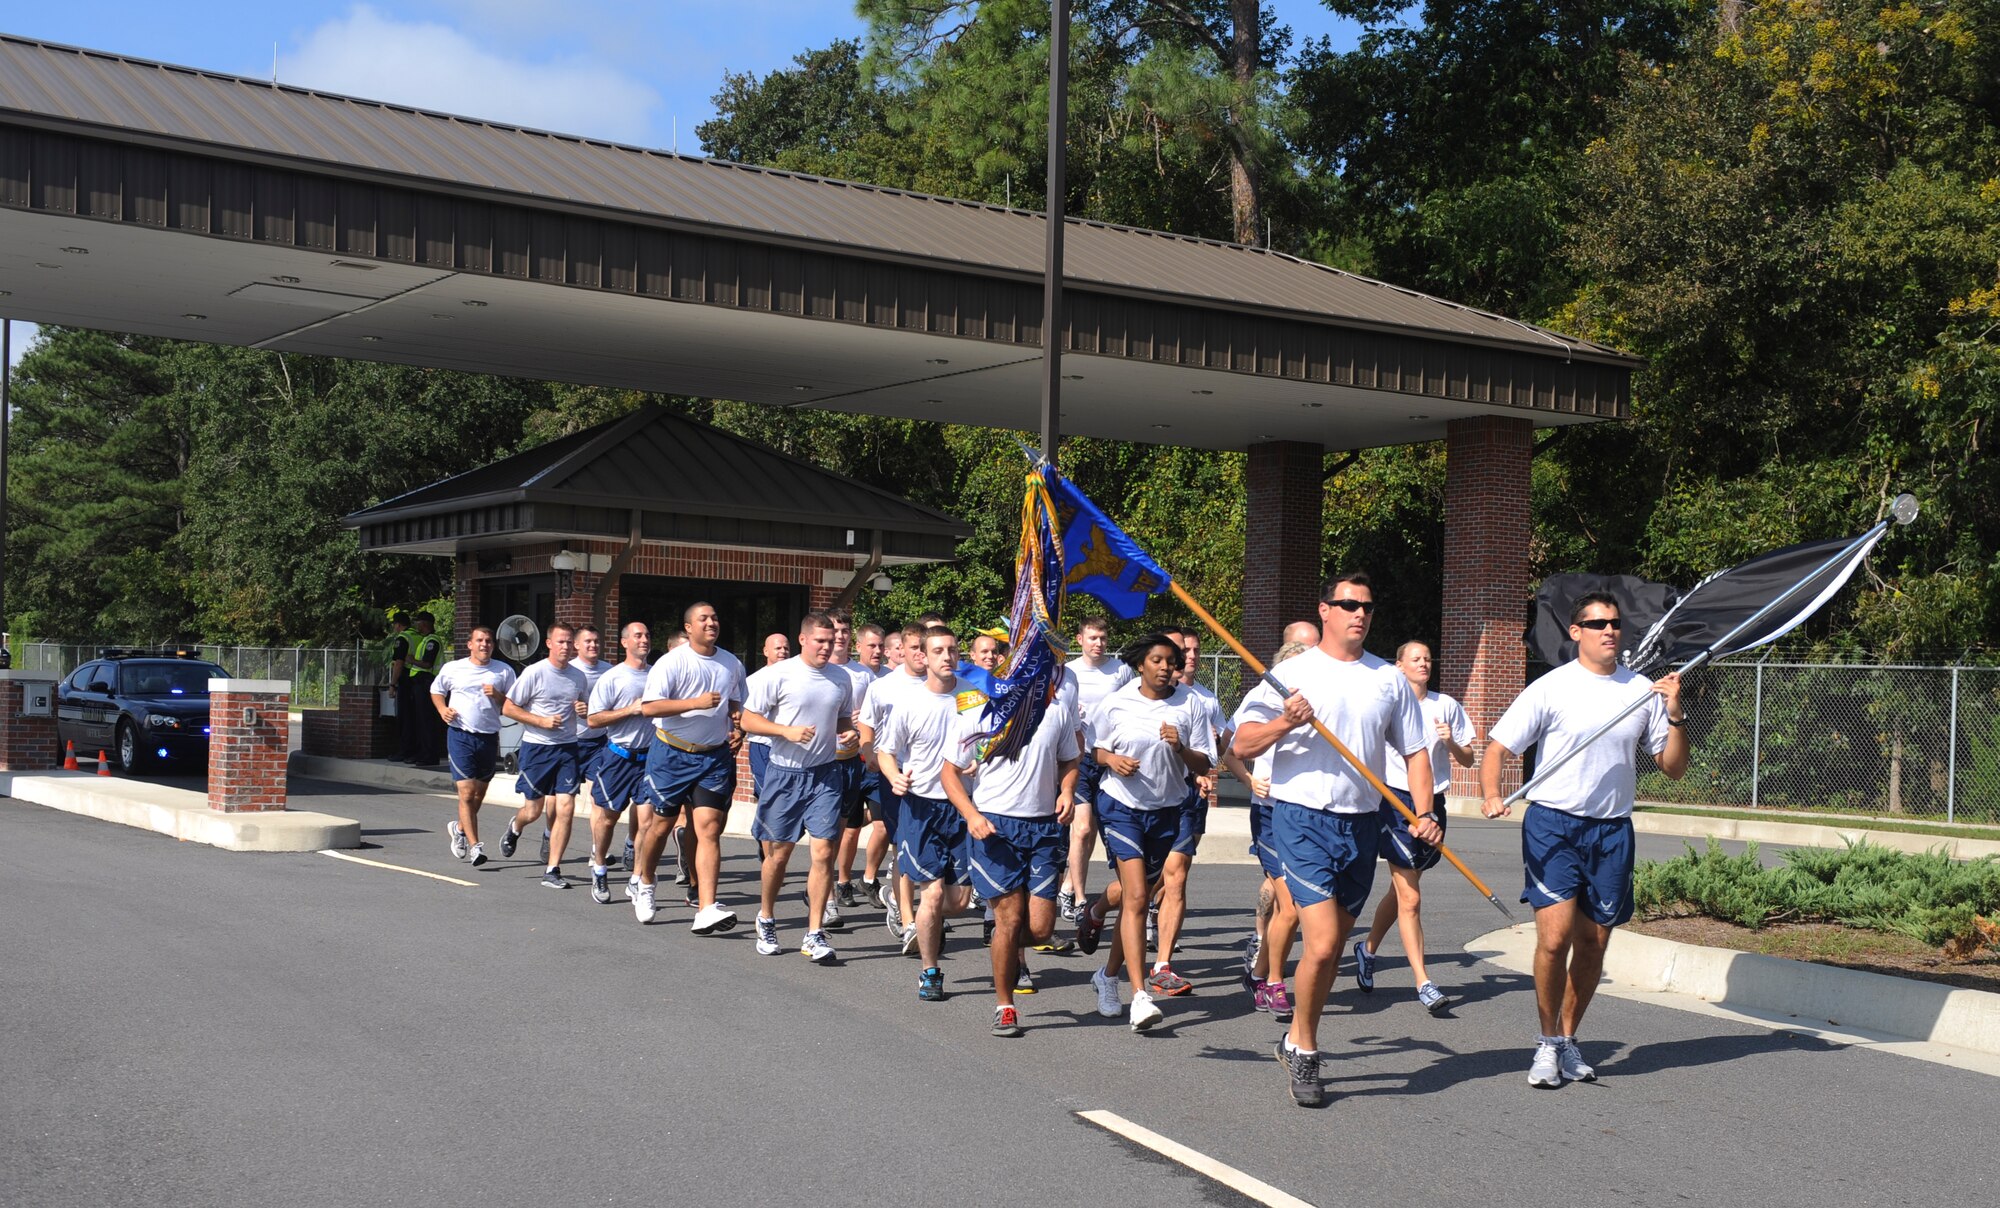 Moody Airmen participate in the 4th annual Tiger-thon run in Valdosta, Ga., Sept. 21, 2012. The 23-mile relay run began on base, continued throughout Valdosta and ended at Moody’s Prisoner of War/Missing in Action Memorial Park. (U.S. Air Force Airman 1st Class Olivia Dominique/Released)